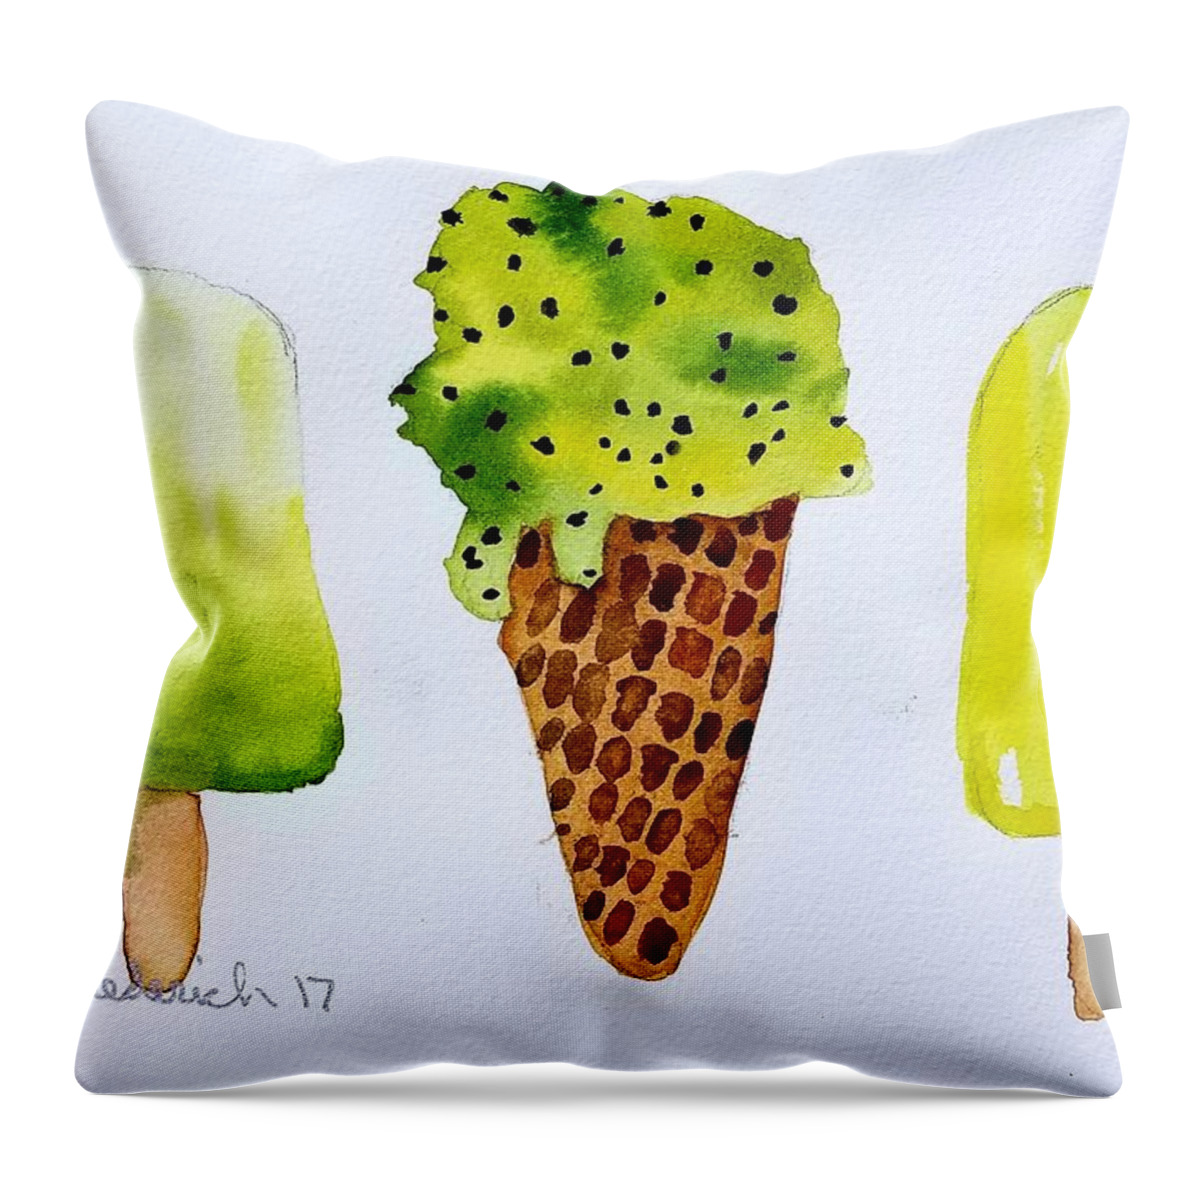 Summertime Throw Pillow featuring the painting Summertime by Ann Frederick